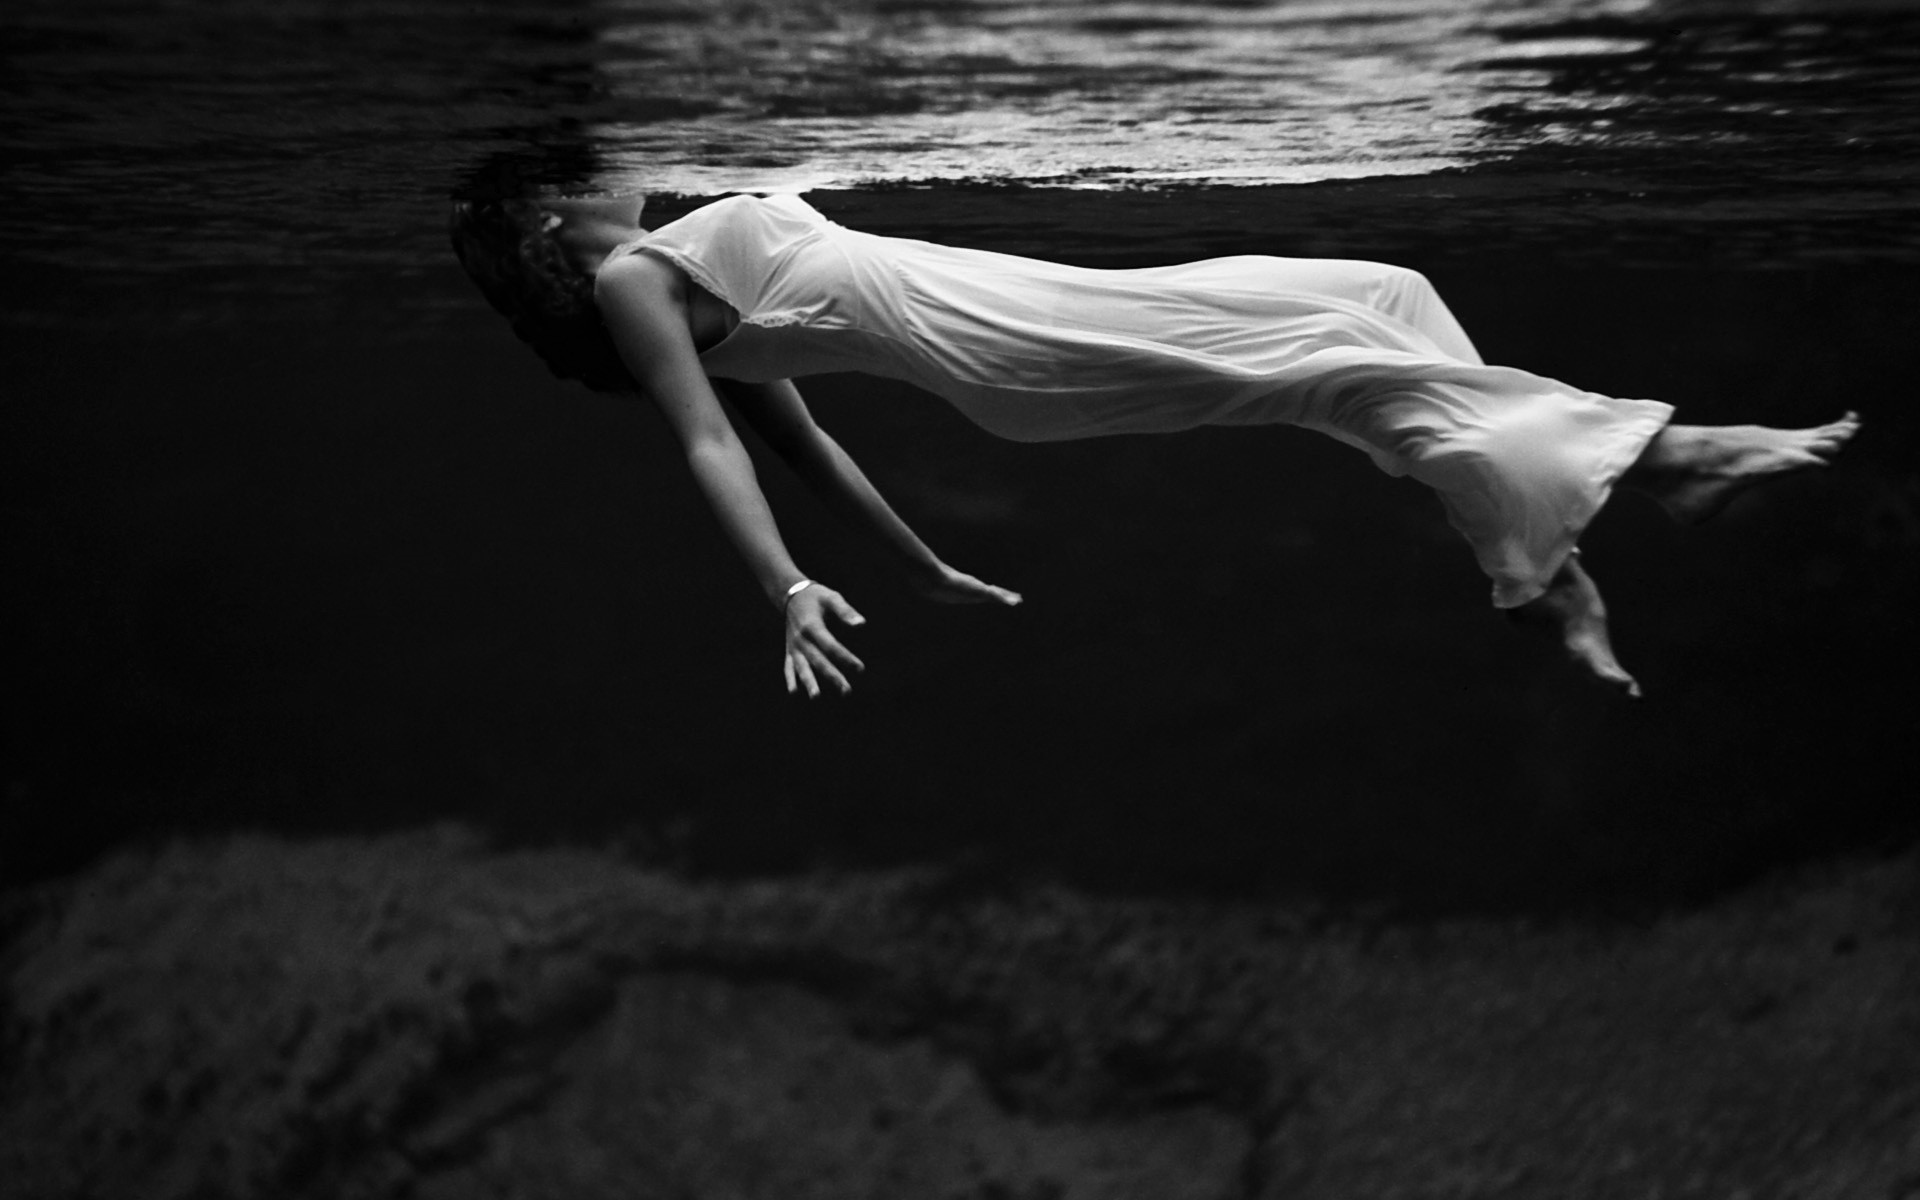 1920x1200 Ballerina in water wallpapers and images wallpapers pictures photos jpg   Black and white ballerina wallpaper